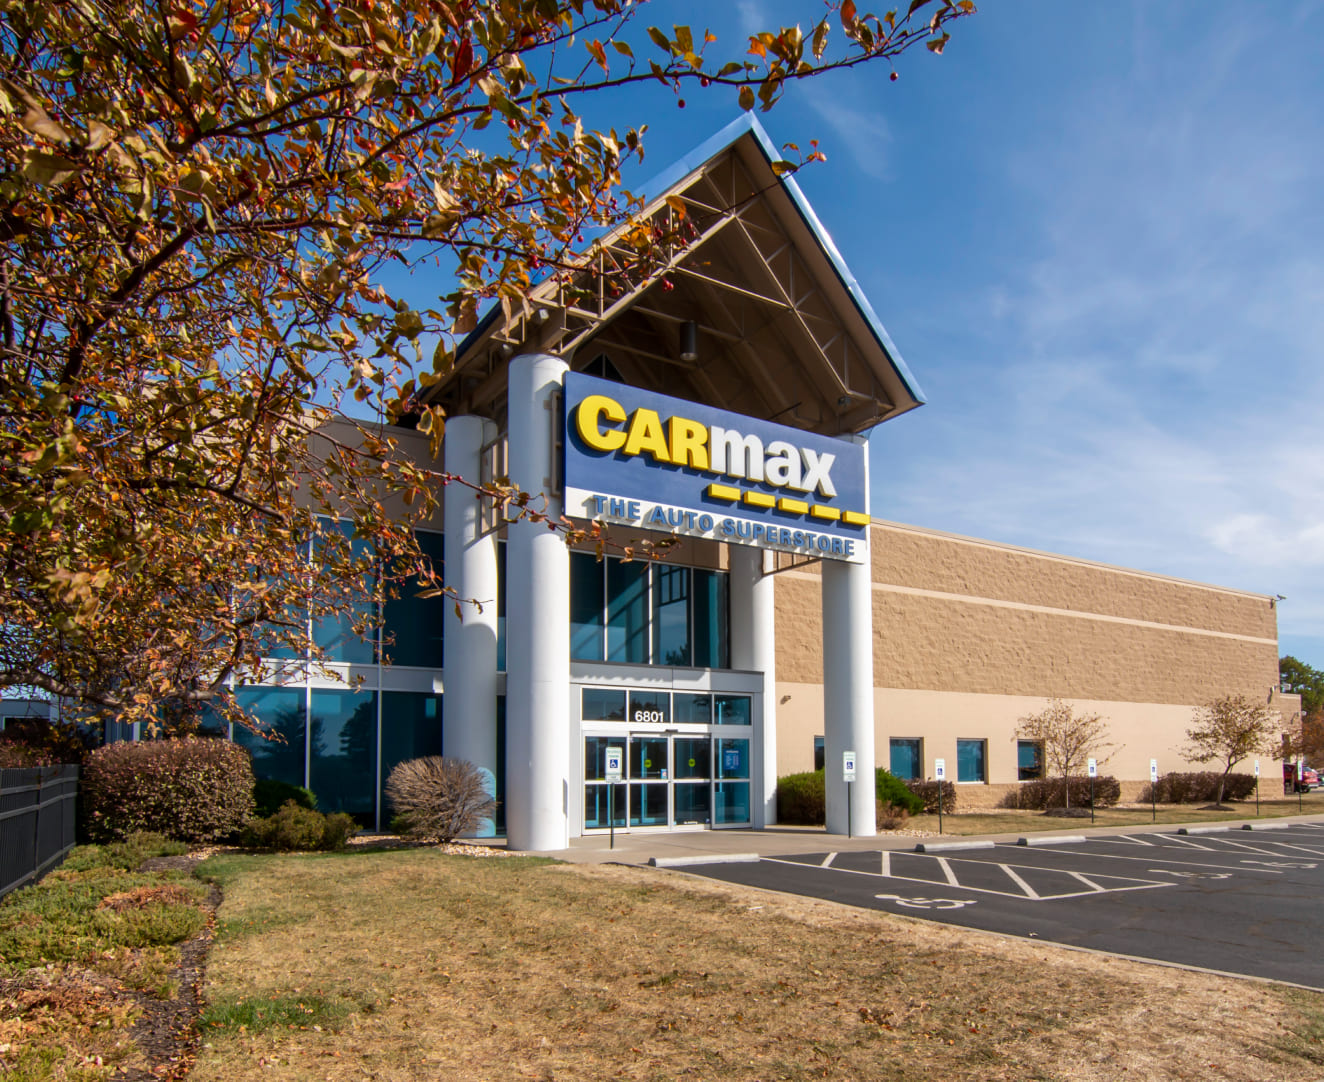 A leftside view of the CarMax at 6801 E. Frontage Road in Overland Park, KS.